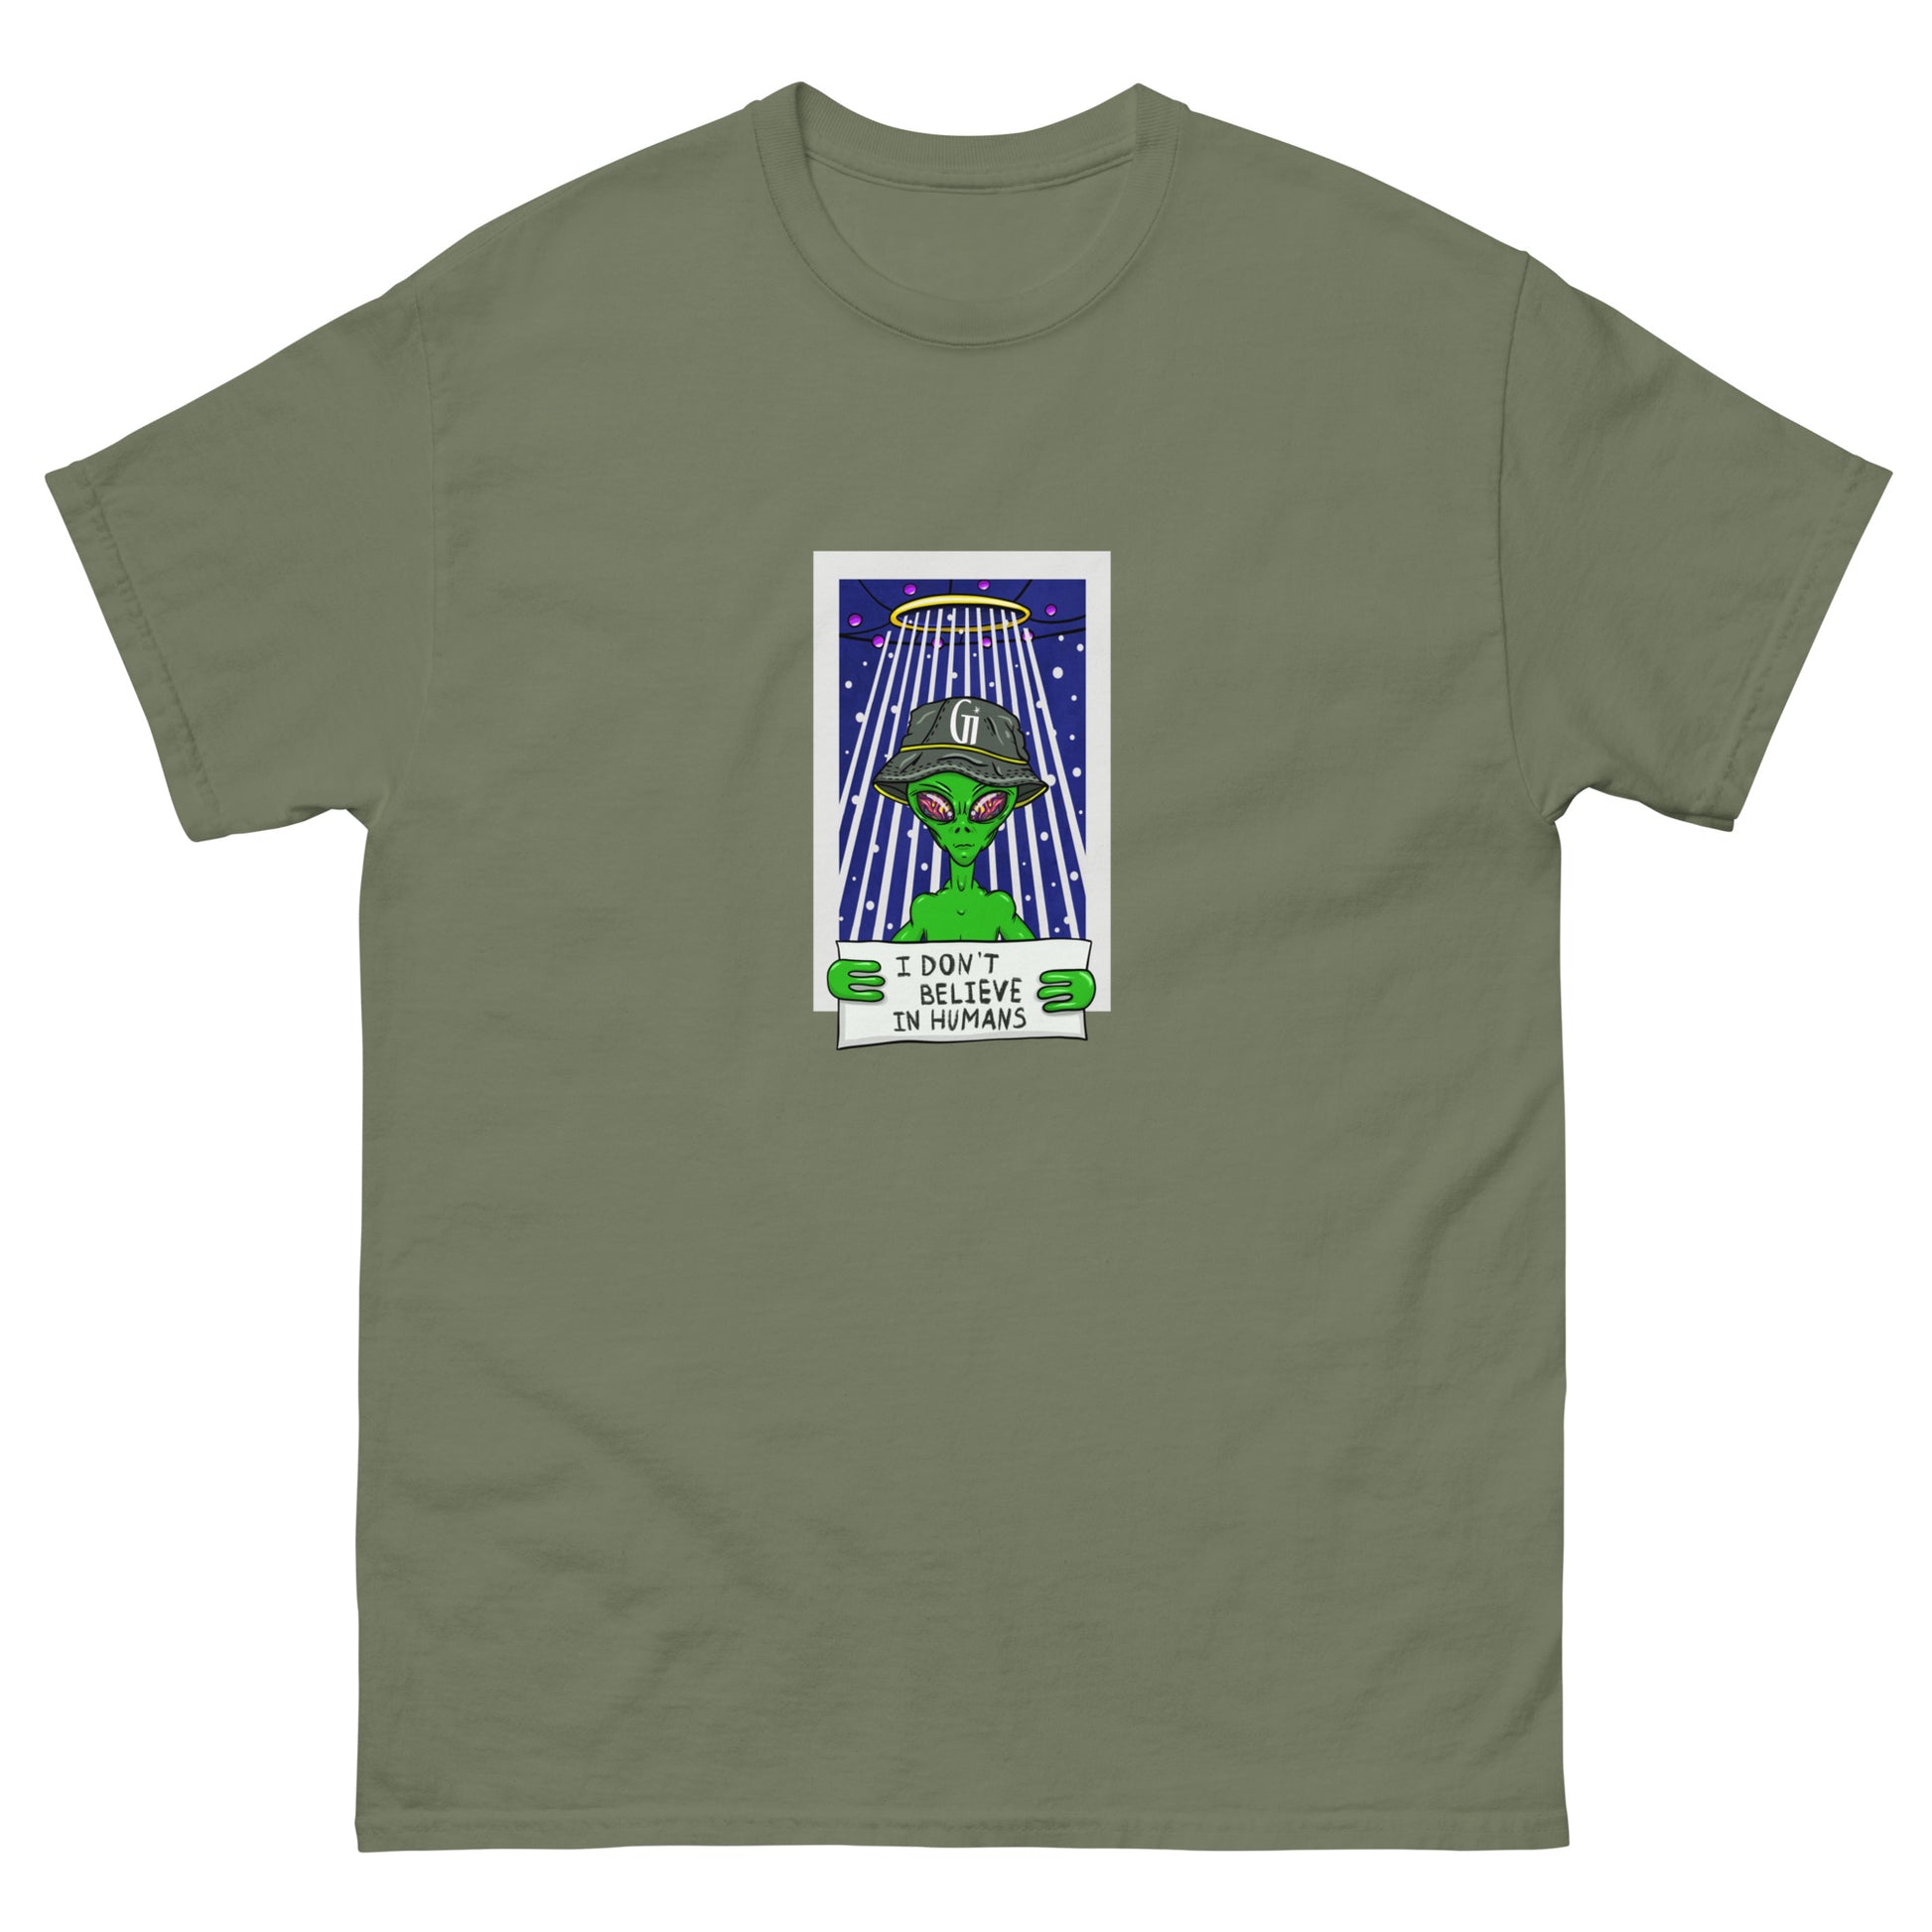 military green color cotton t shirt with stylish alien